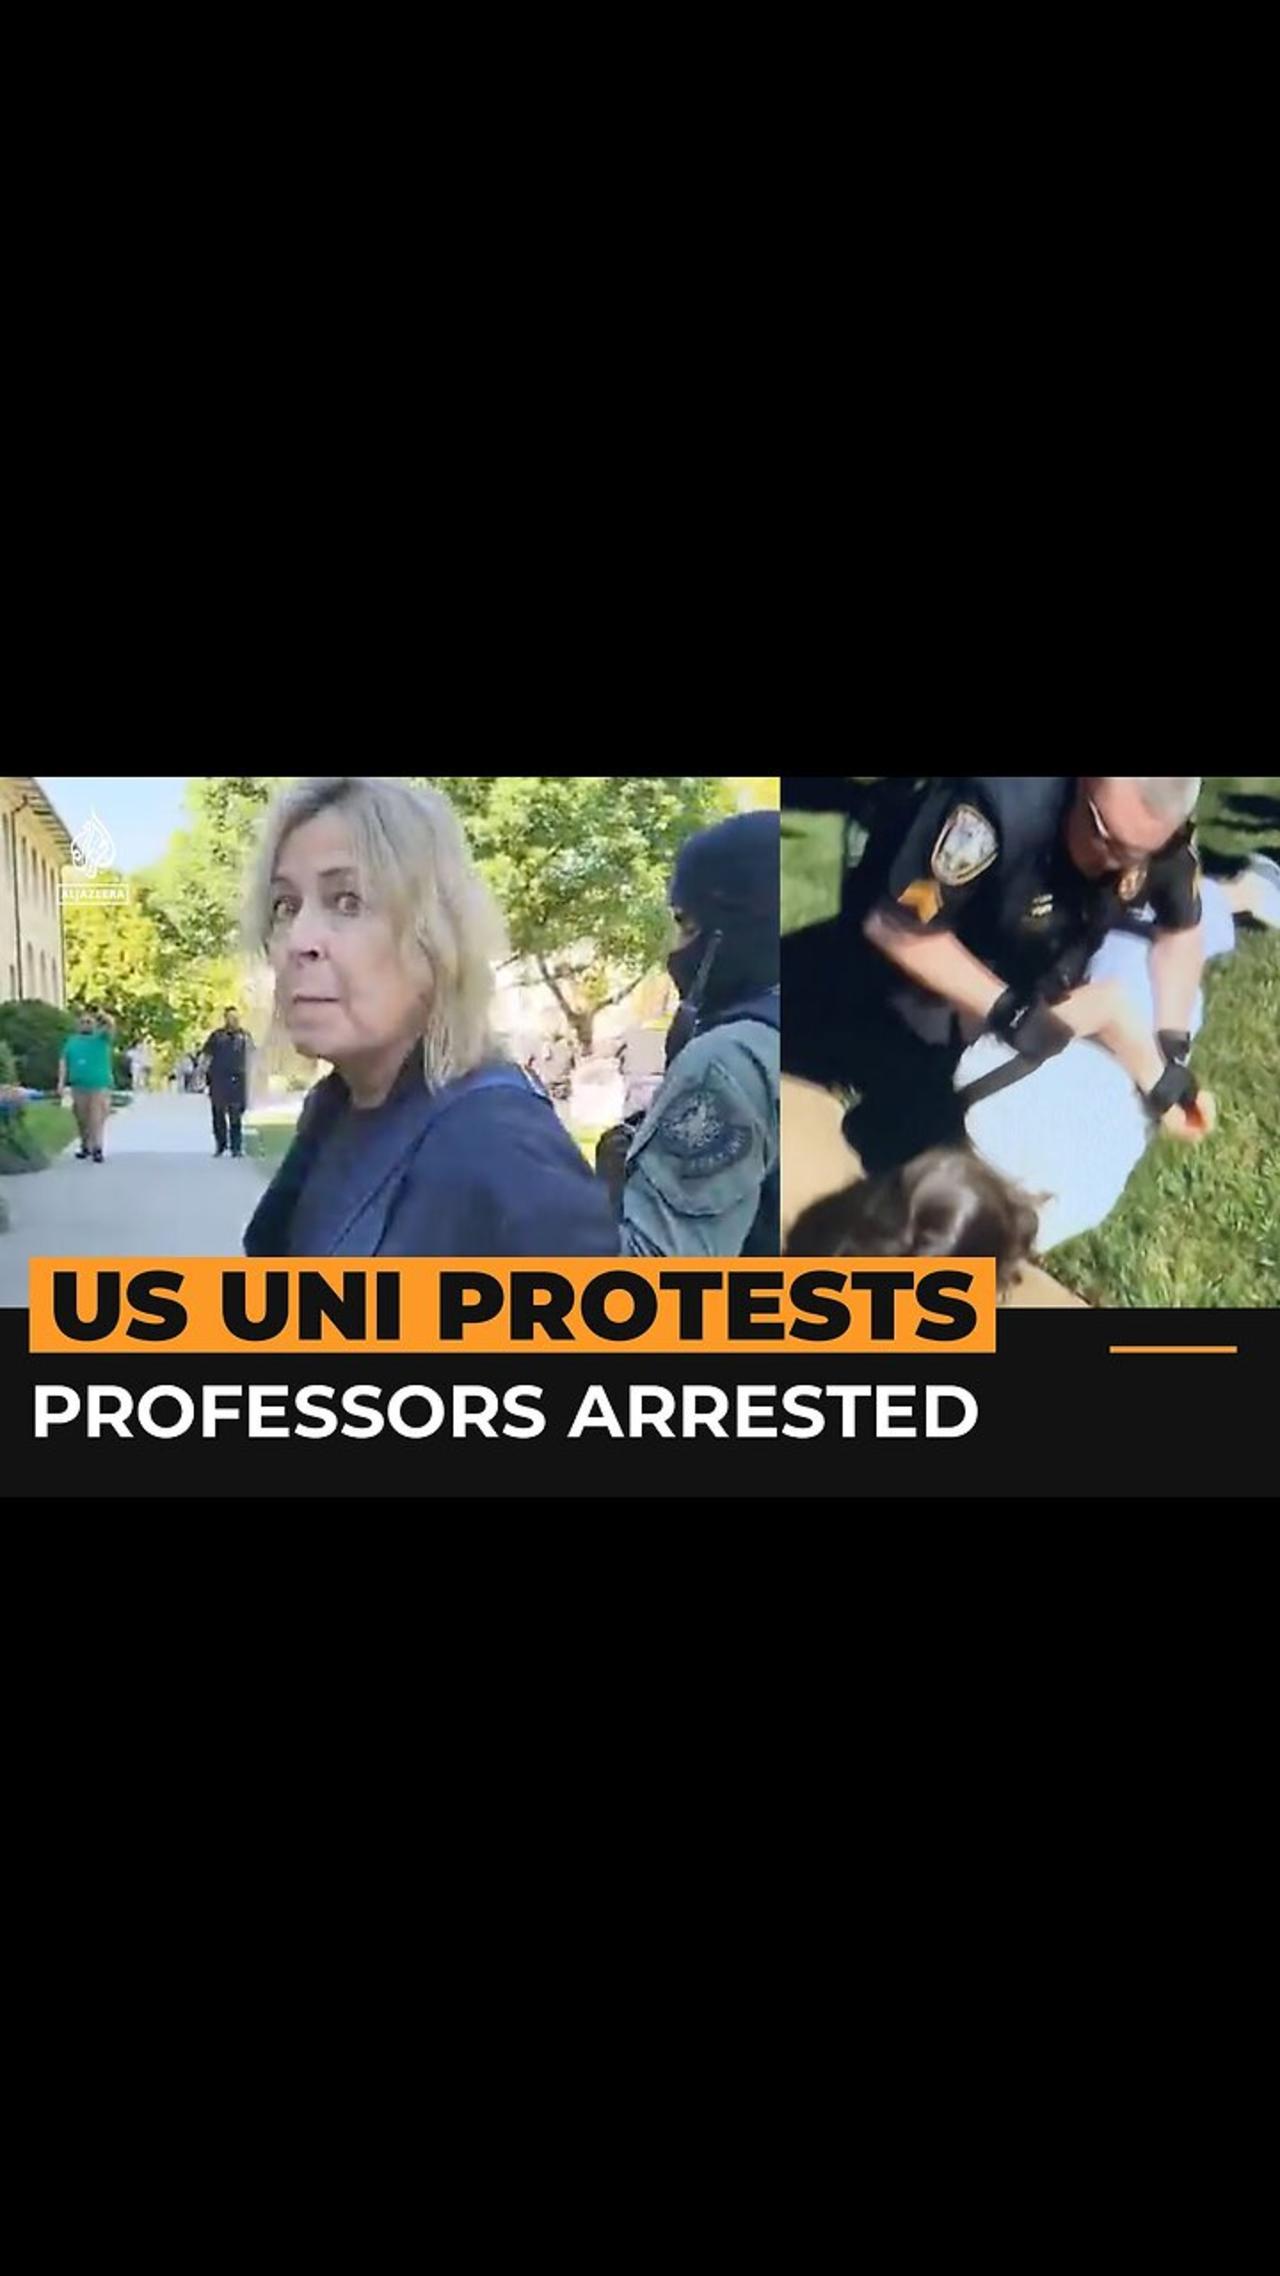 Professors arrested as police use 'violence' to clear university camp | Al Jazeera Newsfeed